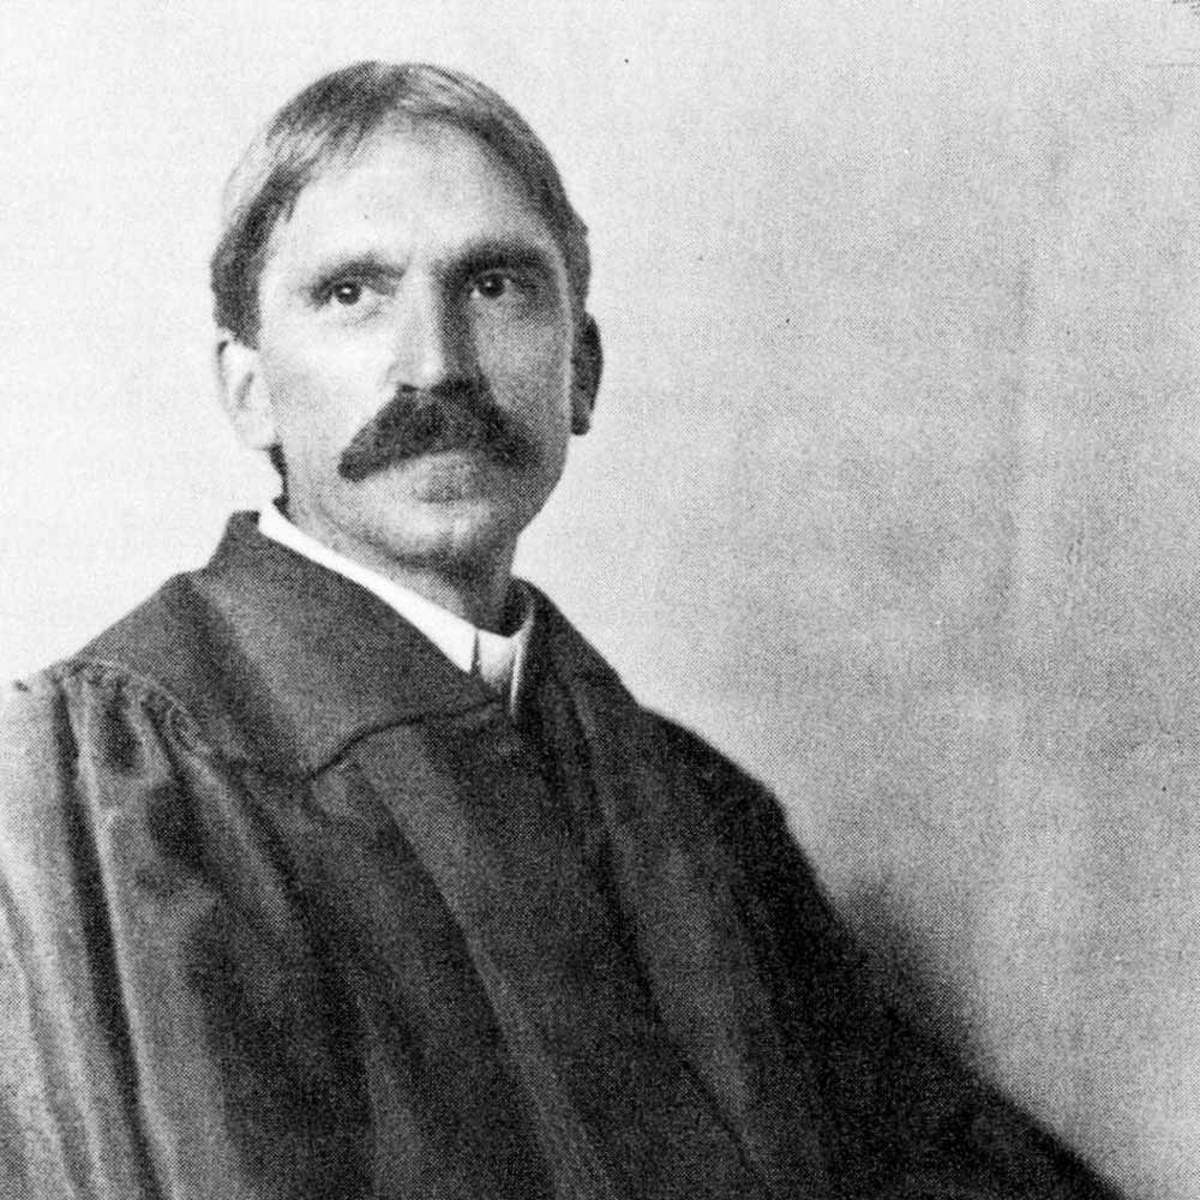 JOHN DEWEY "THE FATHER OF MODERN EDUCATION" AND BELOVED FIGURE OF THE LEFT